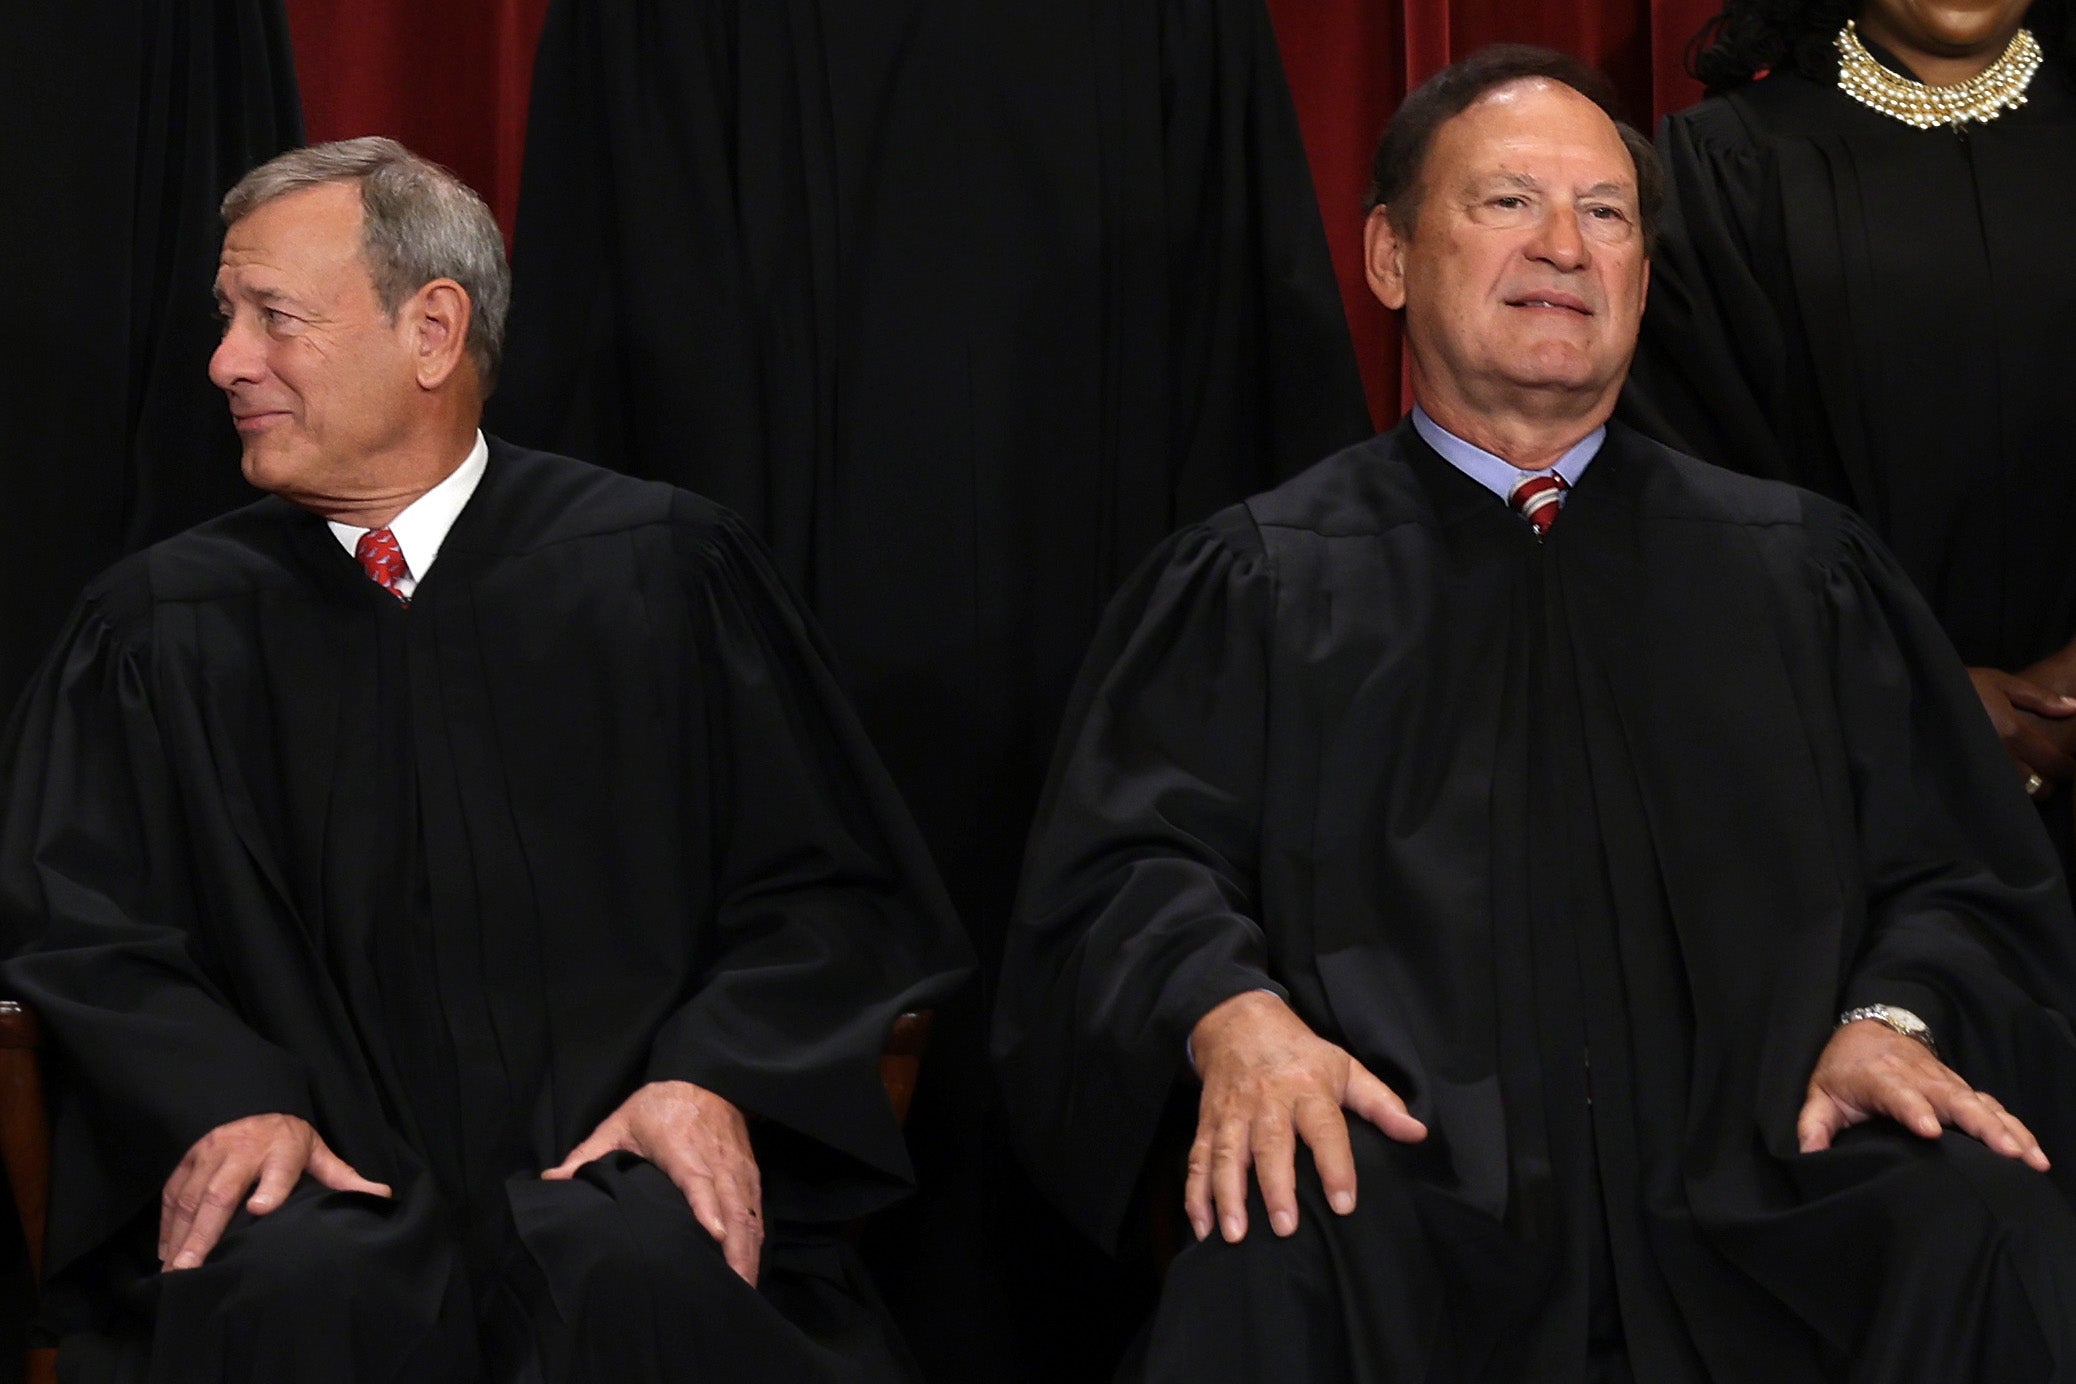 United States Supreme Court Chief Justice John Roberts and Associate Justice Samuel Alito pose for an official portrait on 7 October 2022